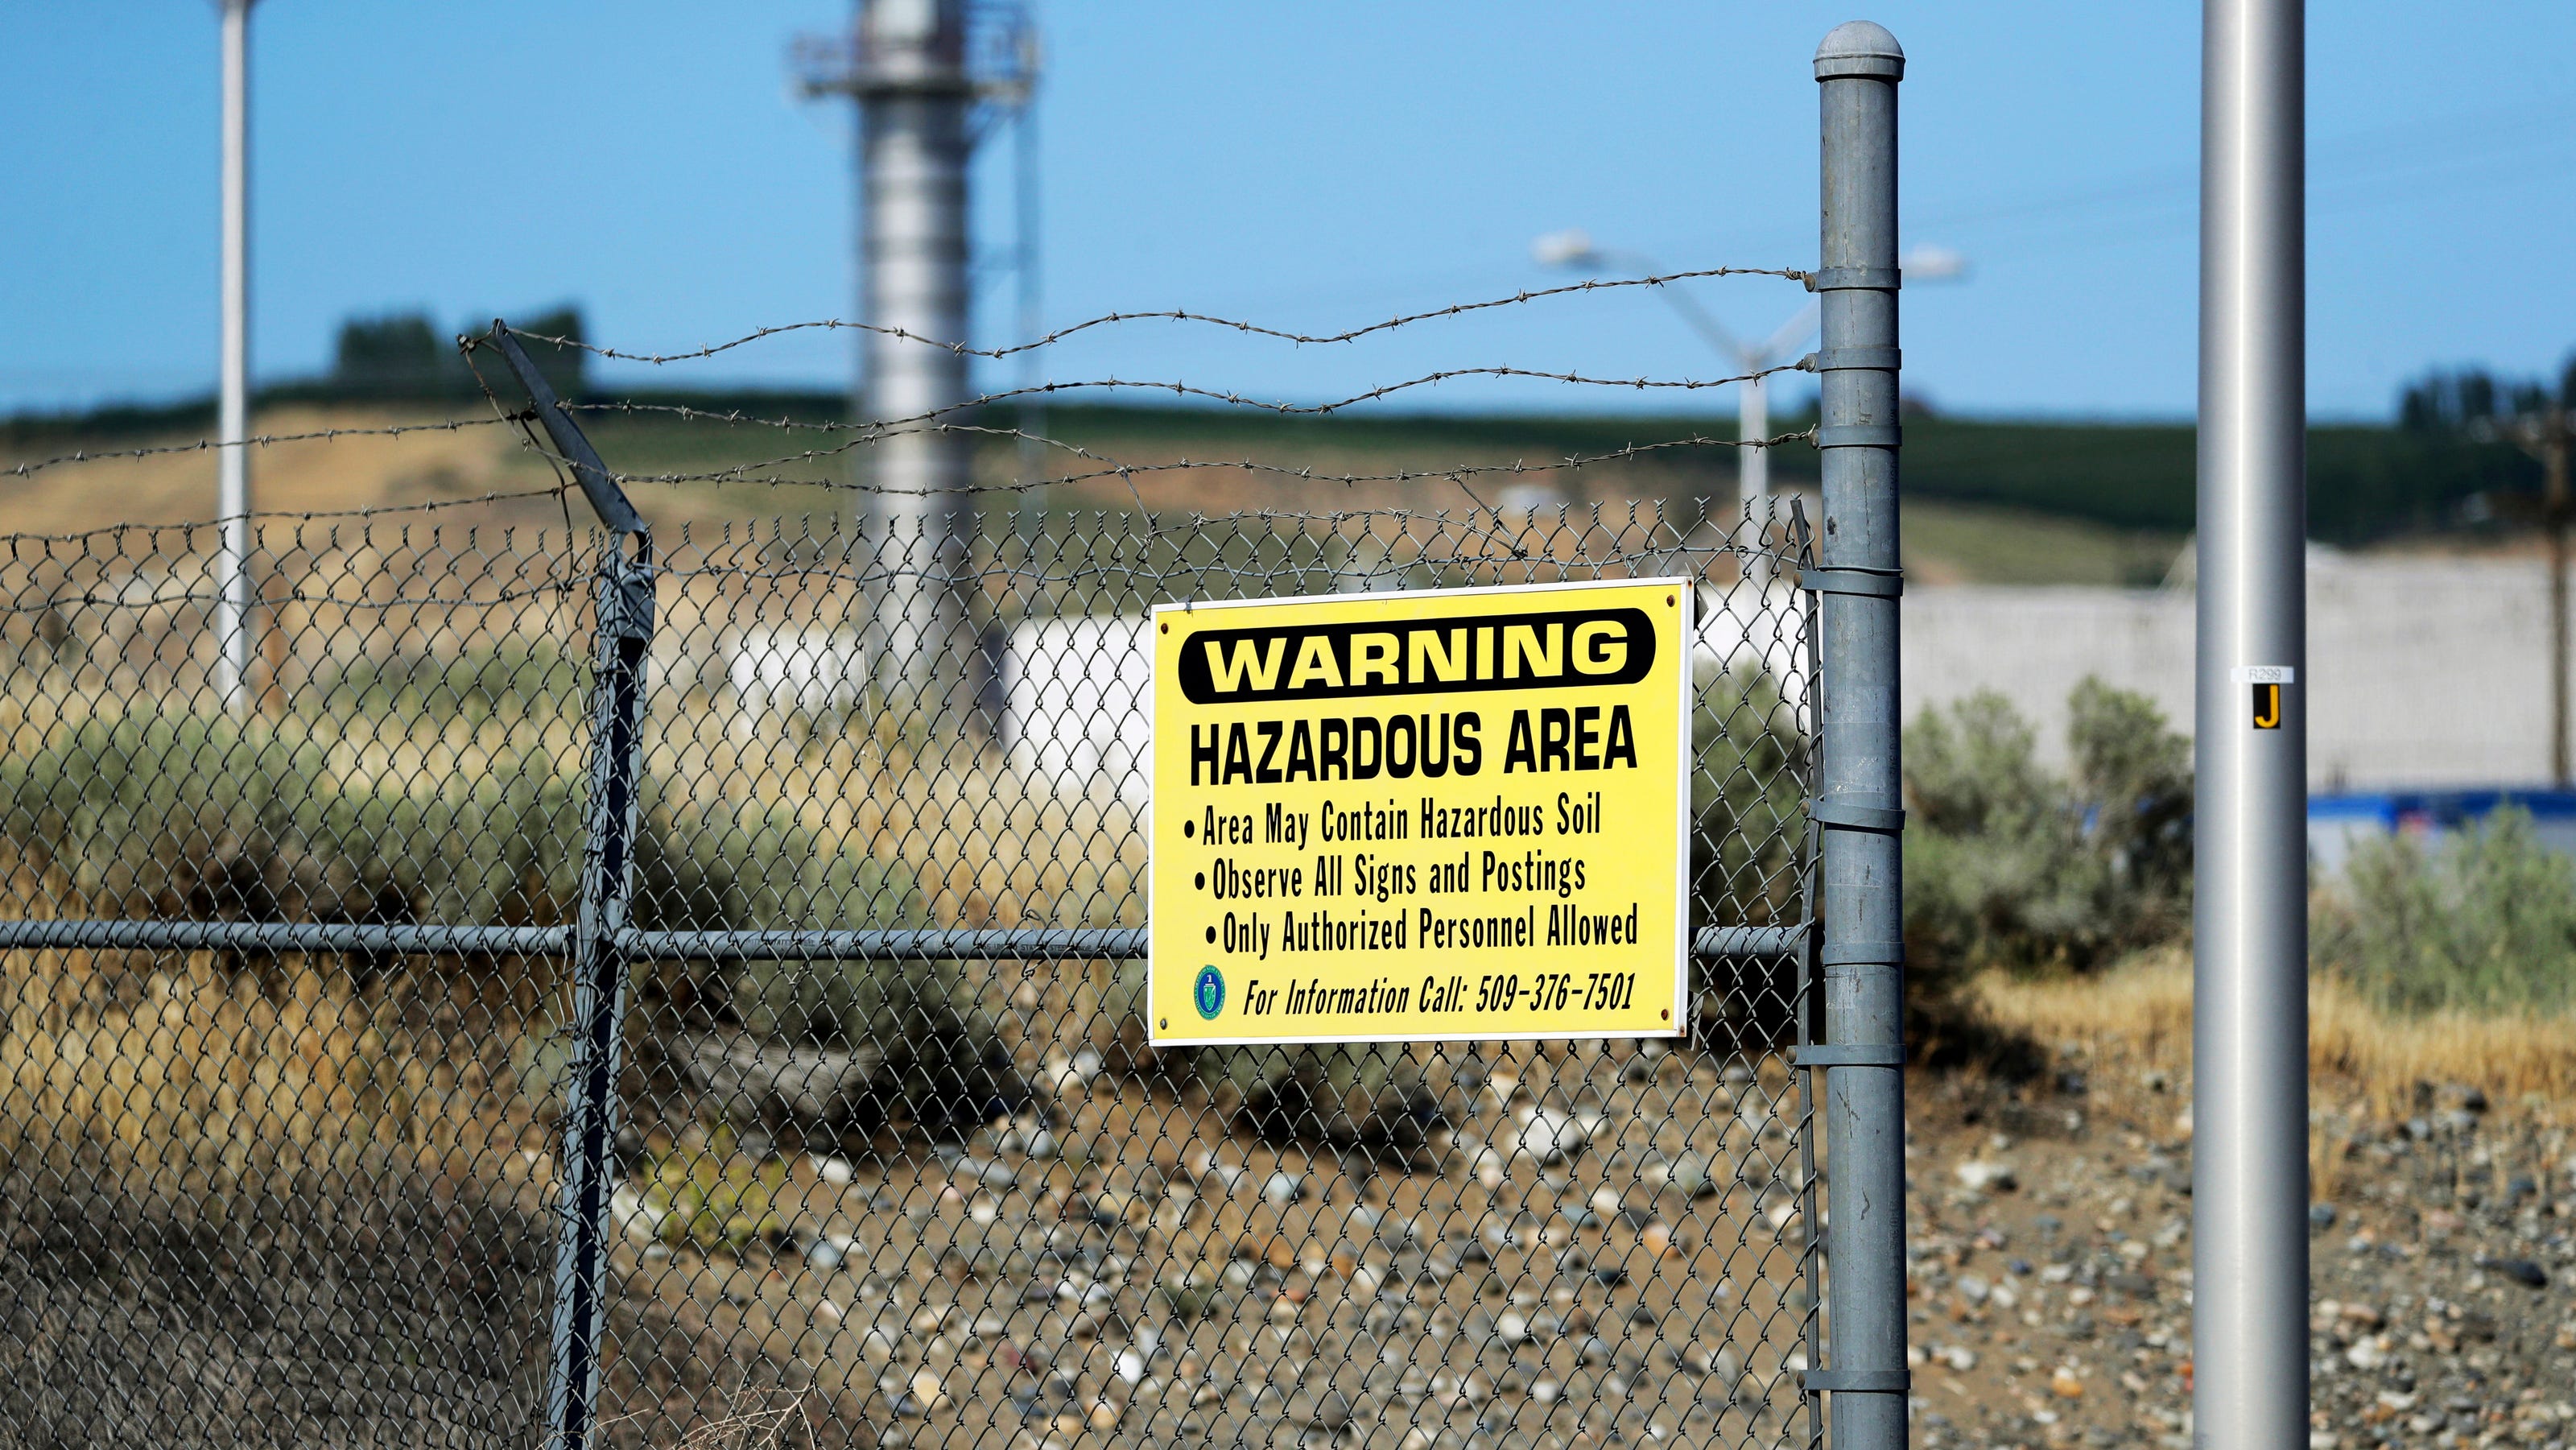 Michigan reps press Biden to stop Canadian plan to store nuclear waste near Lake Huron - The Detroit News